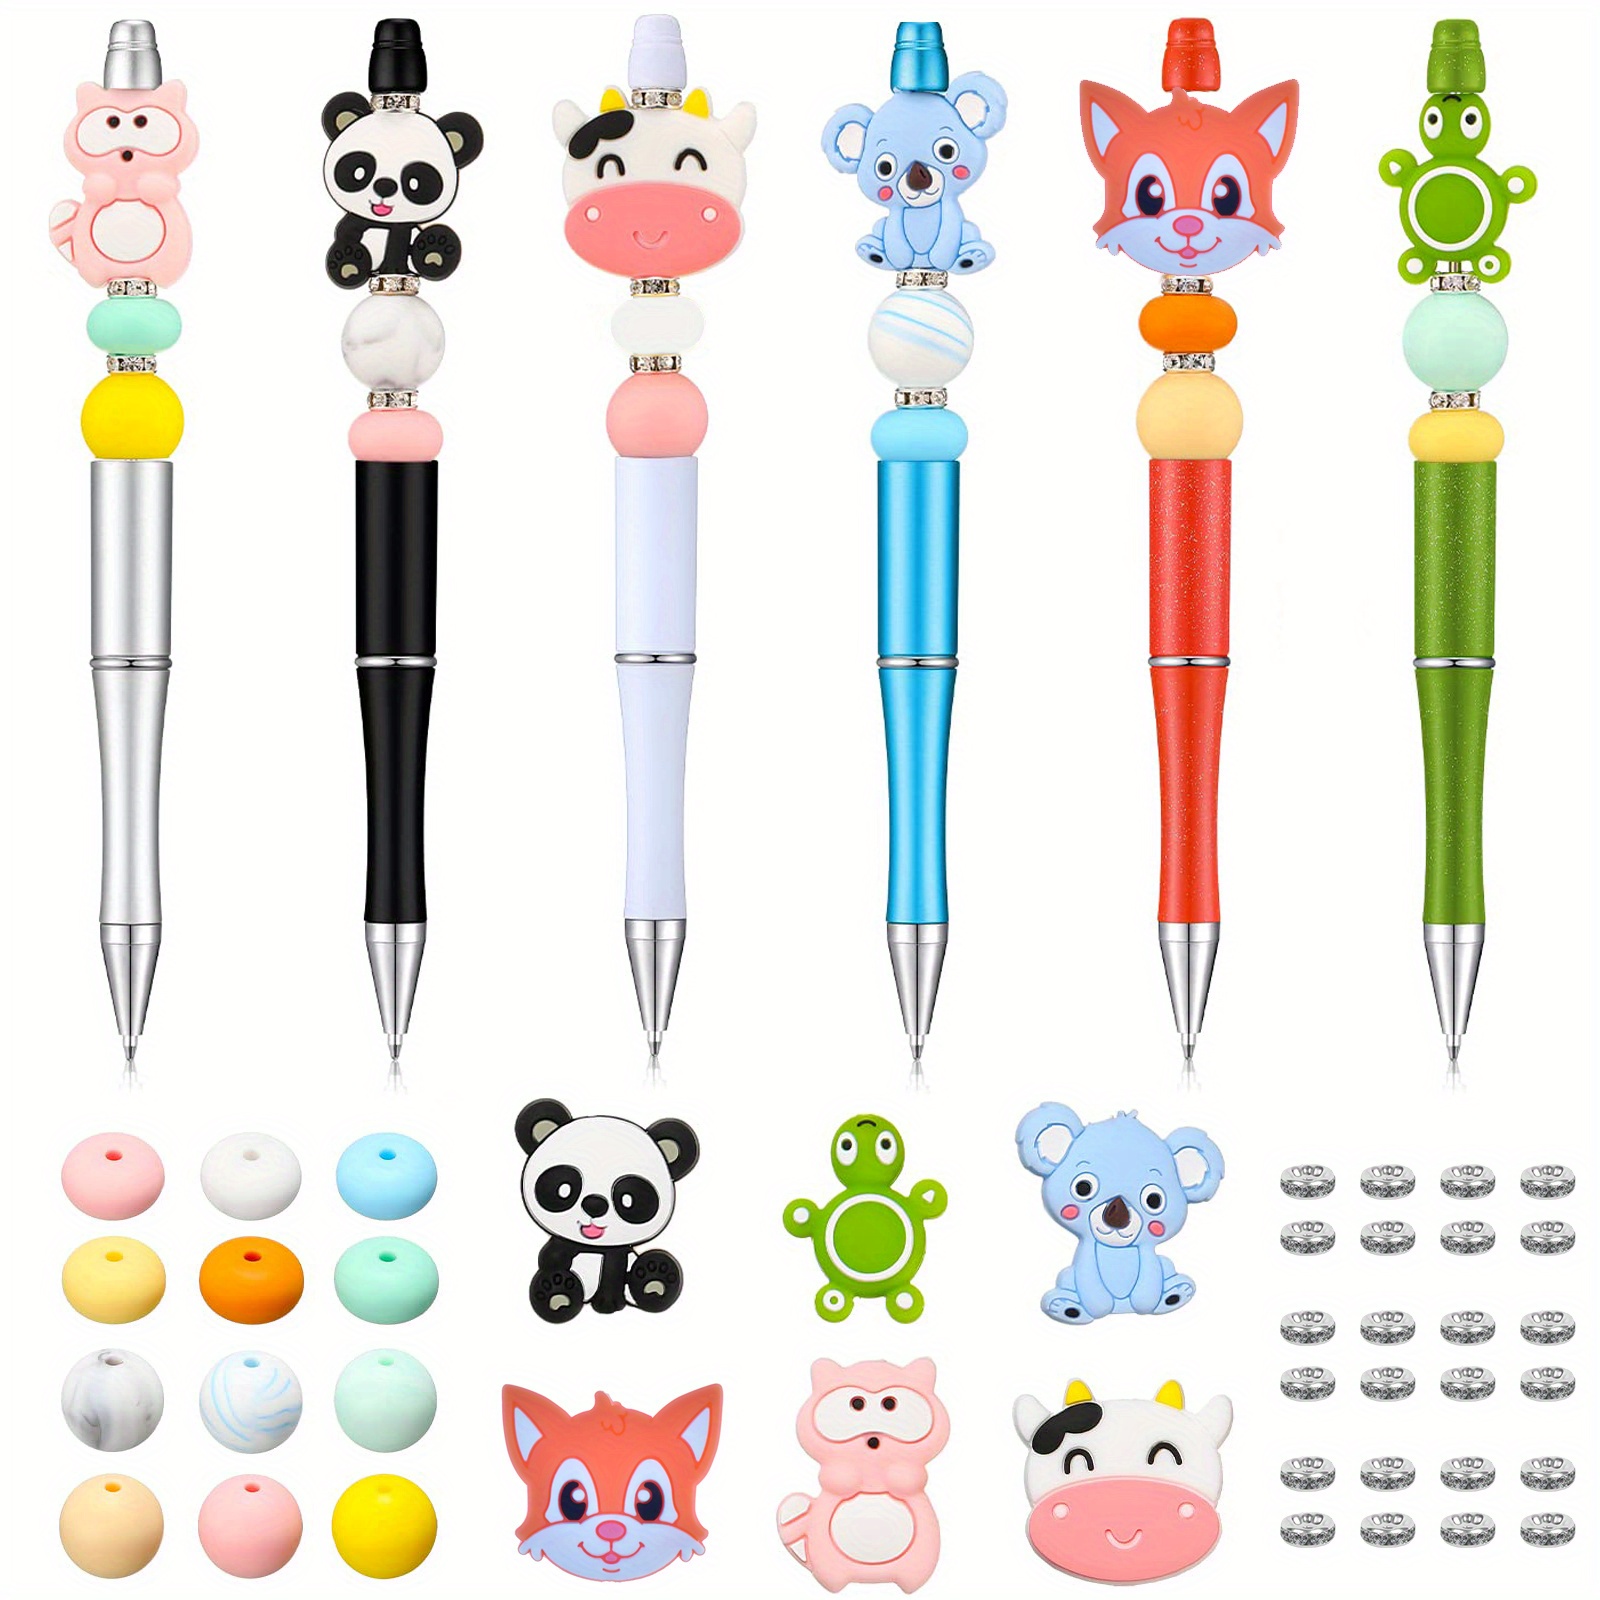 Ink Pen White Ink Pen Silicone Beads Glitter Pen Writing 